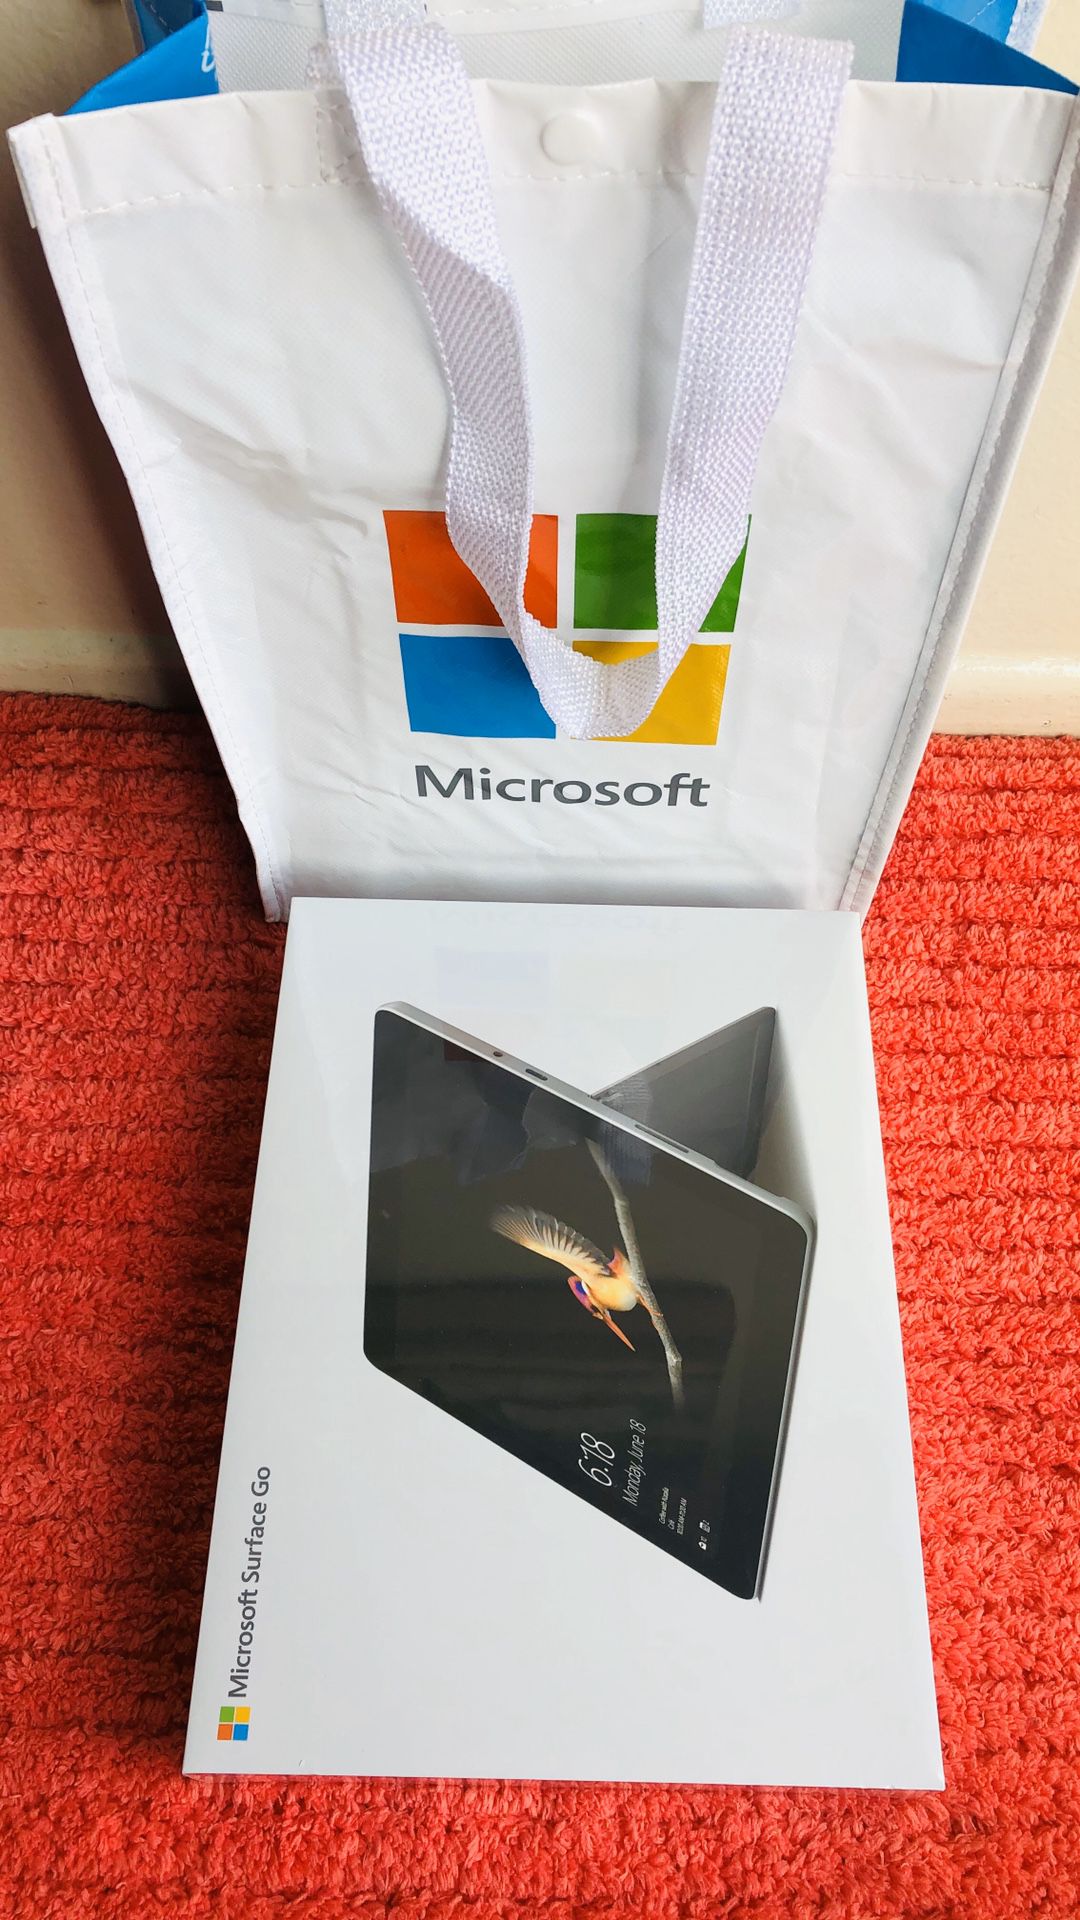 Microsoft Surface Go 10" 64GB Multi-Touch Tablet (Wi-Fi Only)